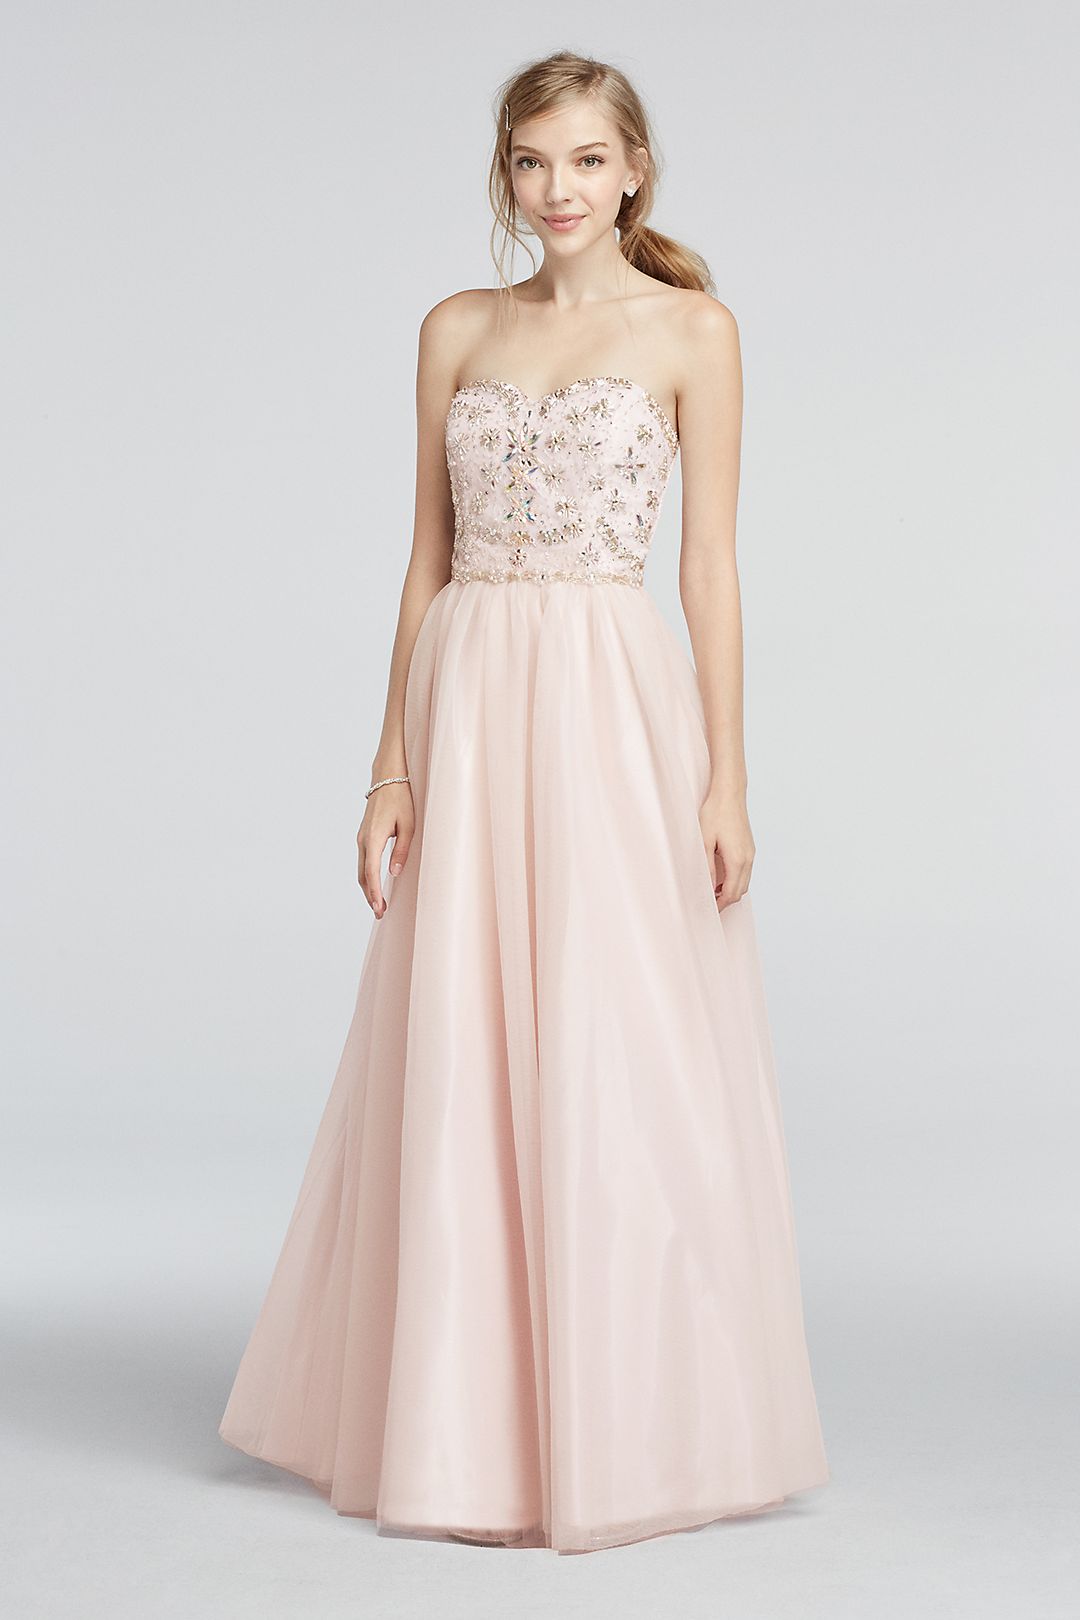 Strapless Mesh Prom Dress with Beaded Bodice Image 1